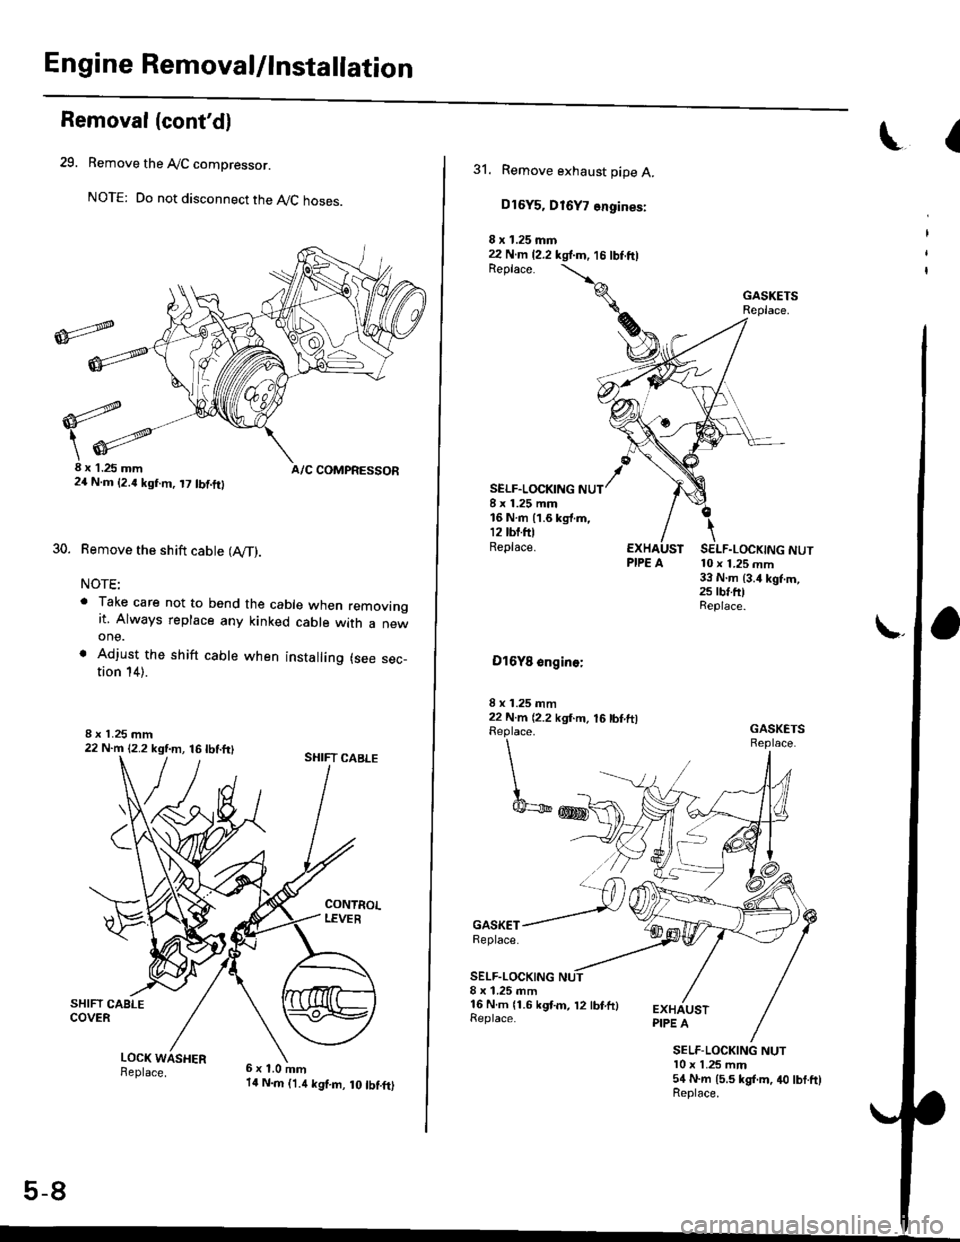 HONDA CIVIC 1997 6.G Workshop Manual Engine Removal/lnstallation
Removal(contdl
29. Remove the AyC compressor.
NOTE: Do not disconnect the AyC hoses.
30.
8x 1.25 mm A/C COMPRESSOR24 N.m (2.{ kgf.m, t7 tbtft}
Remove the shift cable (IV